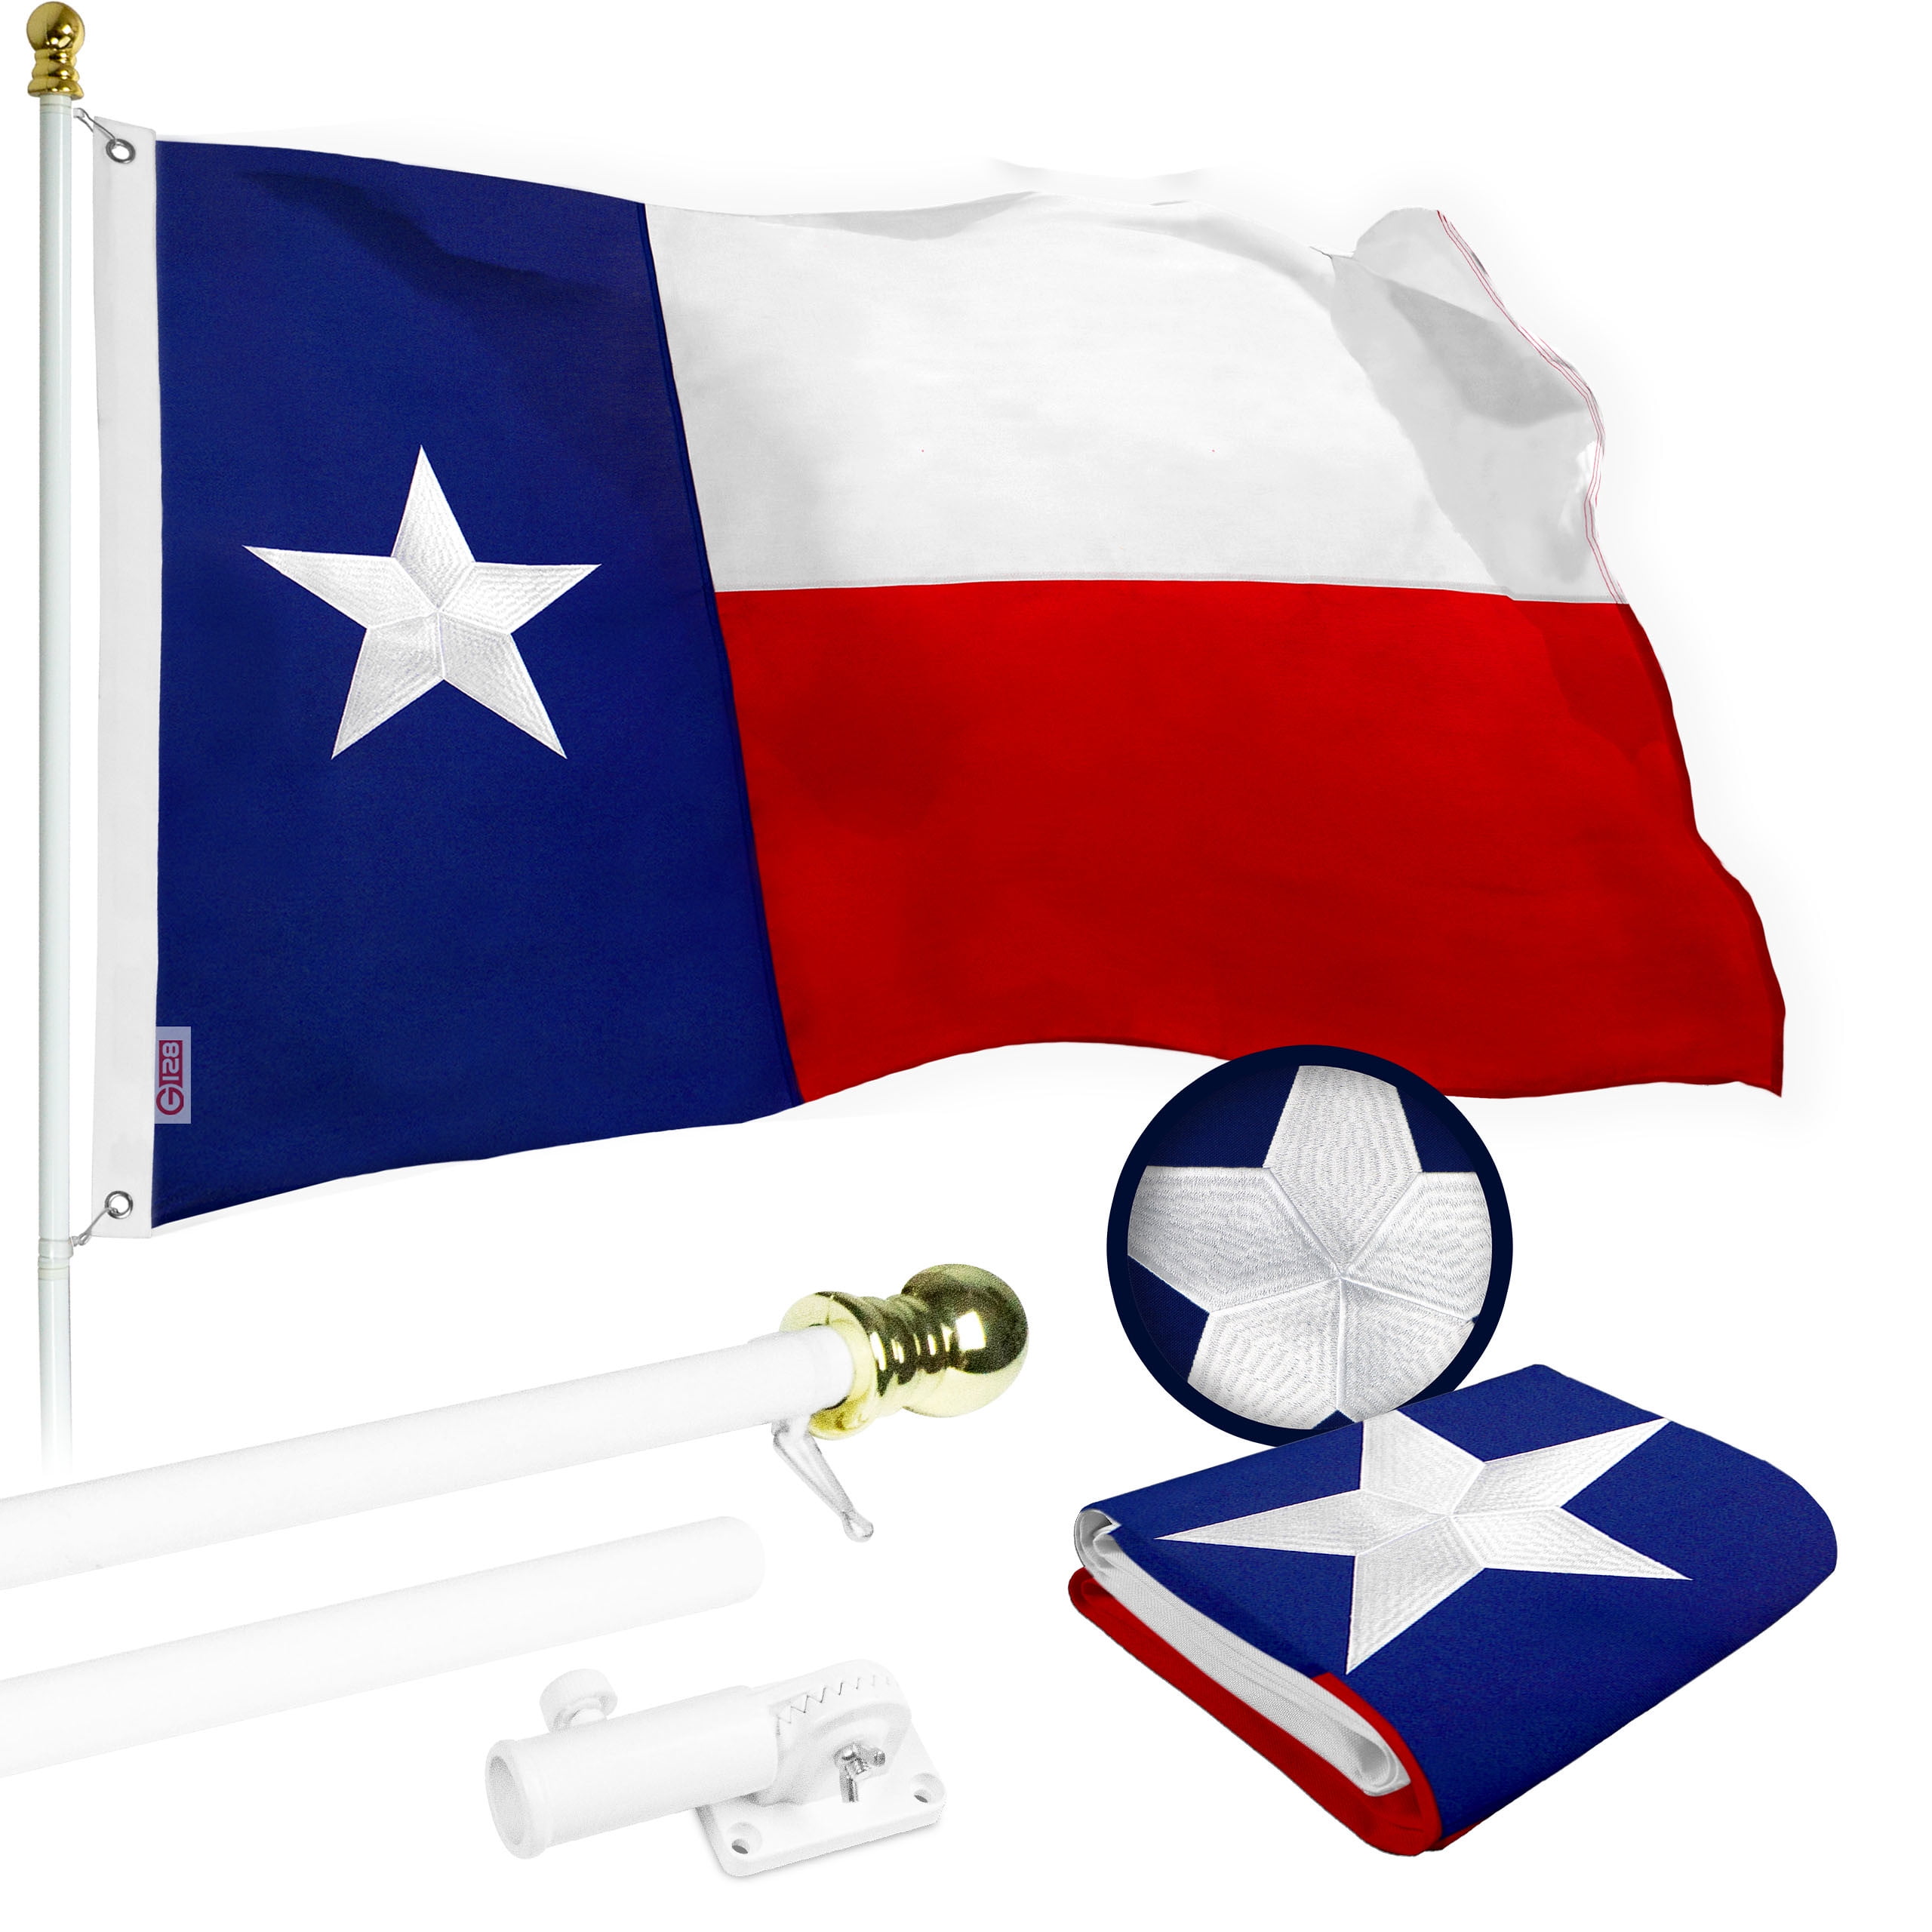 State of Texas Lonestar Flag 4x6 4'x6' Foot Flag Banner 150D Super Polyester 